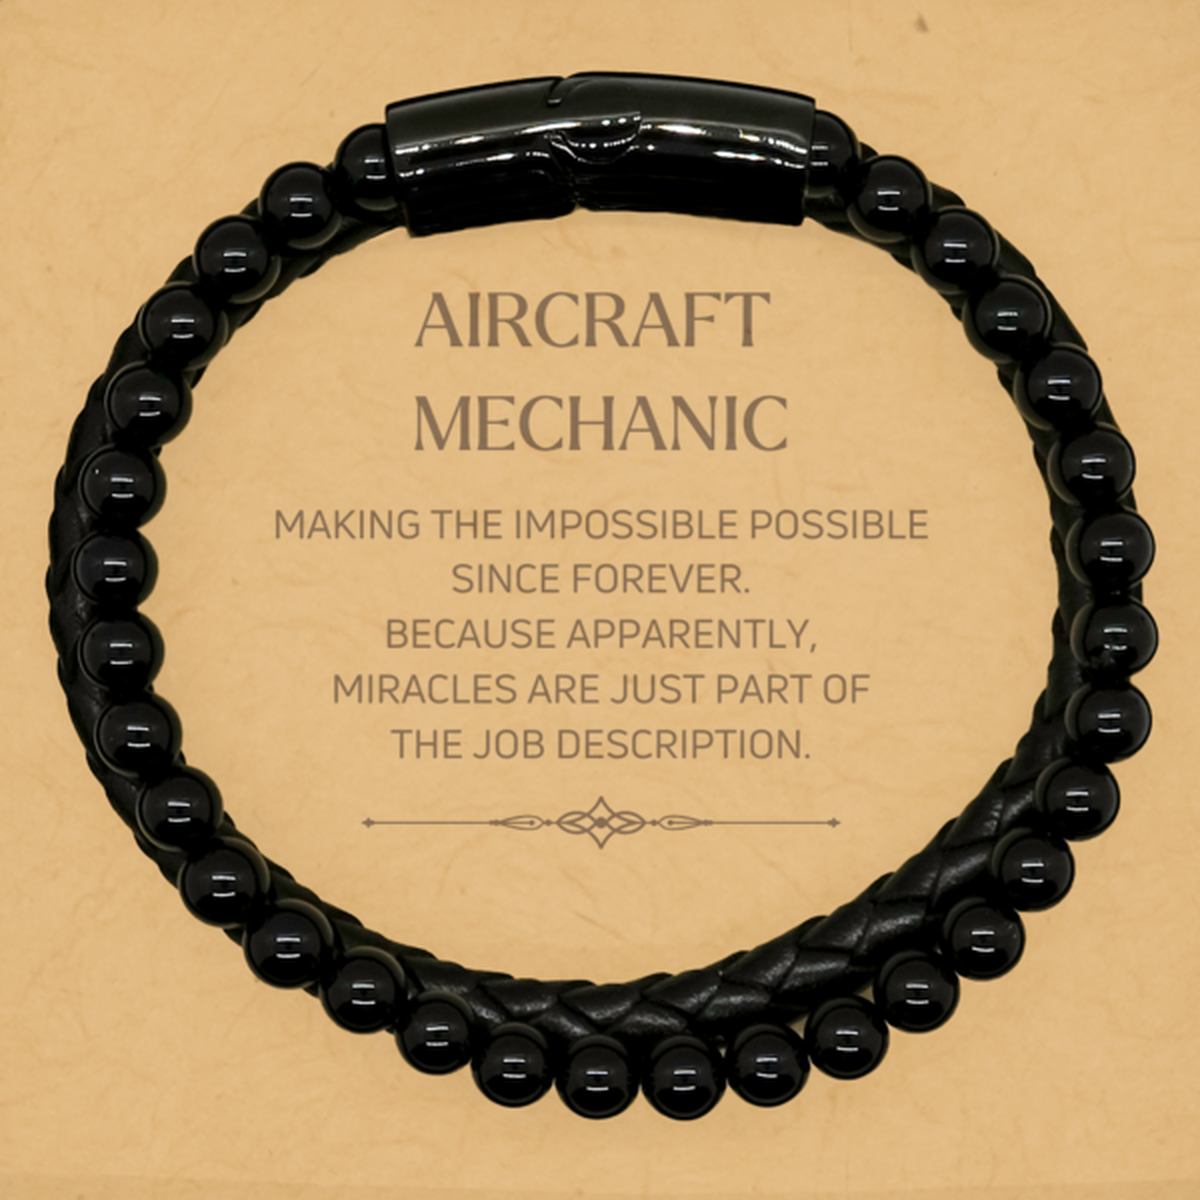 Funny Aircraft Mechanic Gifts, Miracles are just part of the job description, Inspirational Birthday Stone Leather Bracelets For Aircraft Mechanic, Men, Women, Coworkers, Friends, Boss